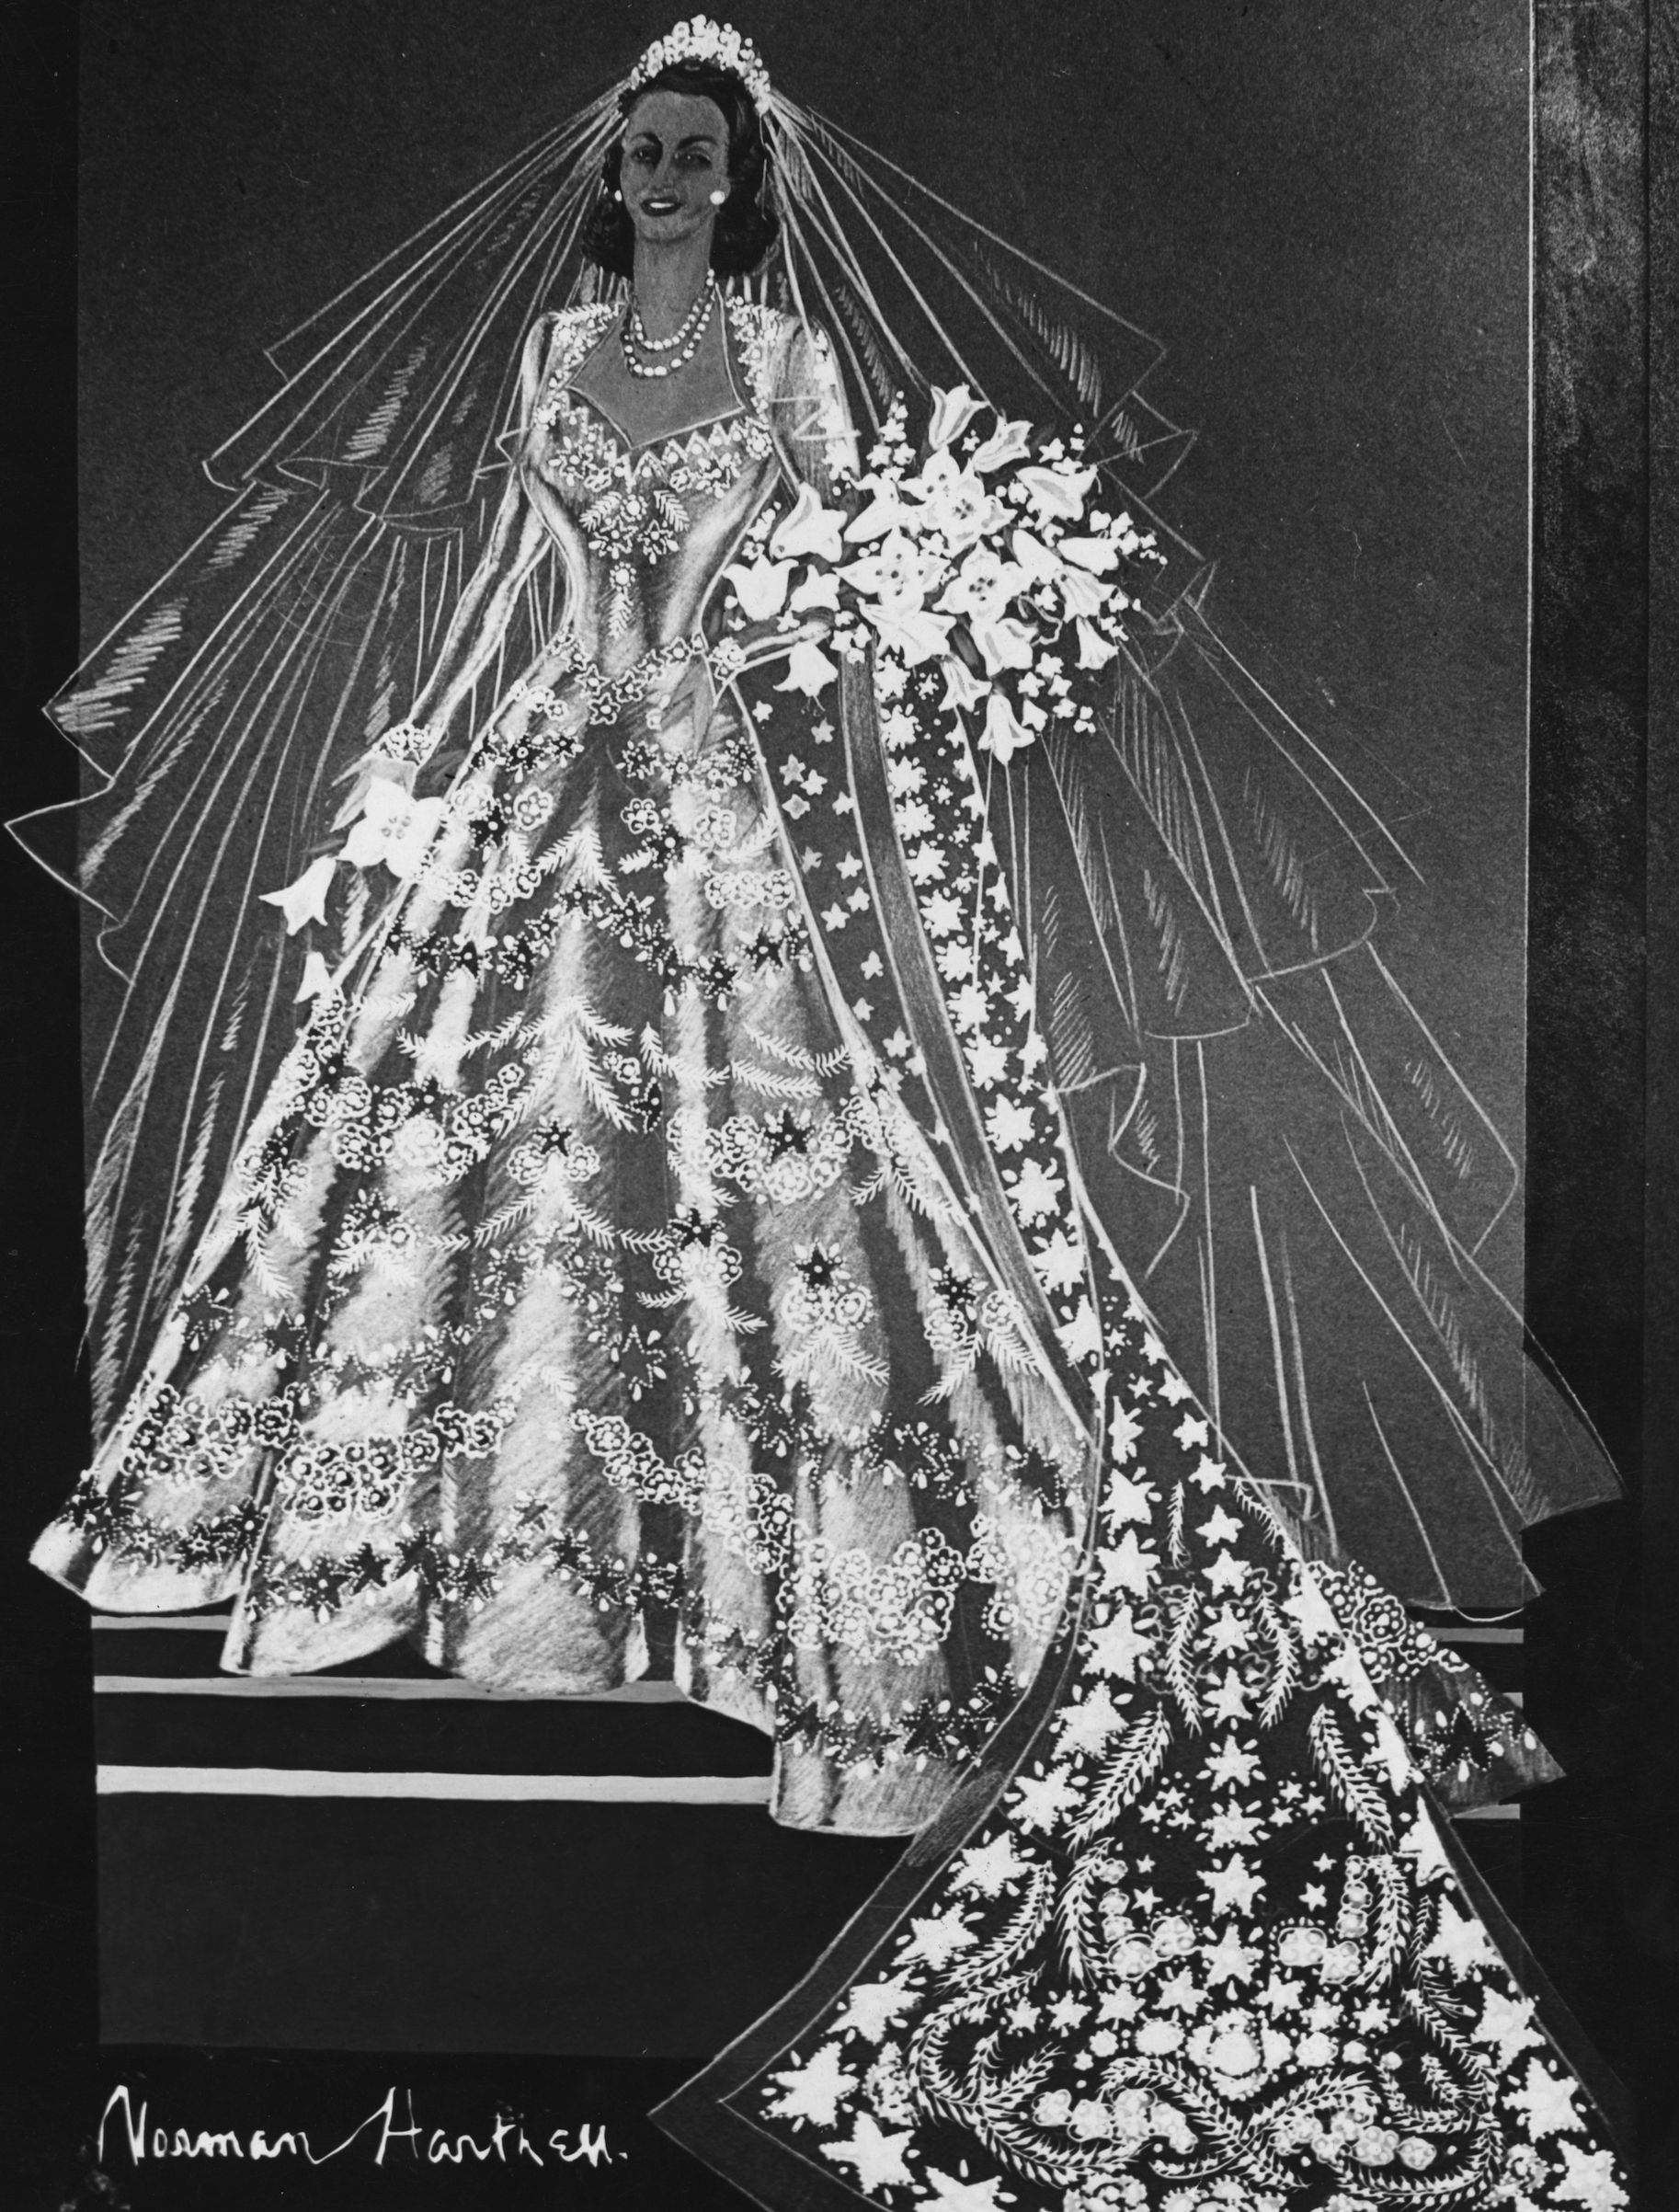 1947: A sketch of Princess Elizabeth's wedding dress by Norman Hartnell. (Central Press/Getty Images)